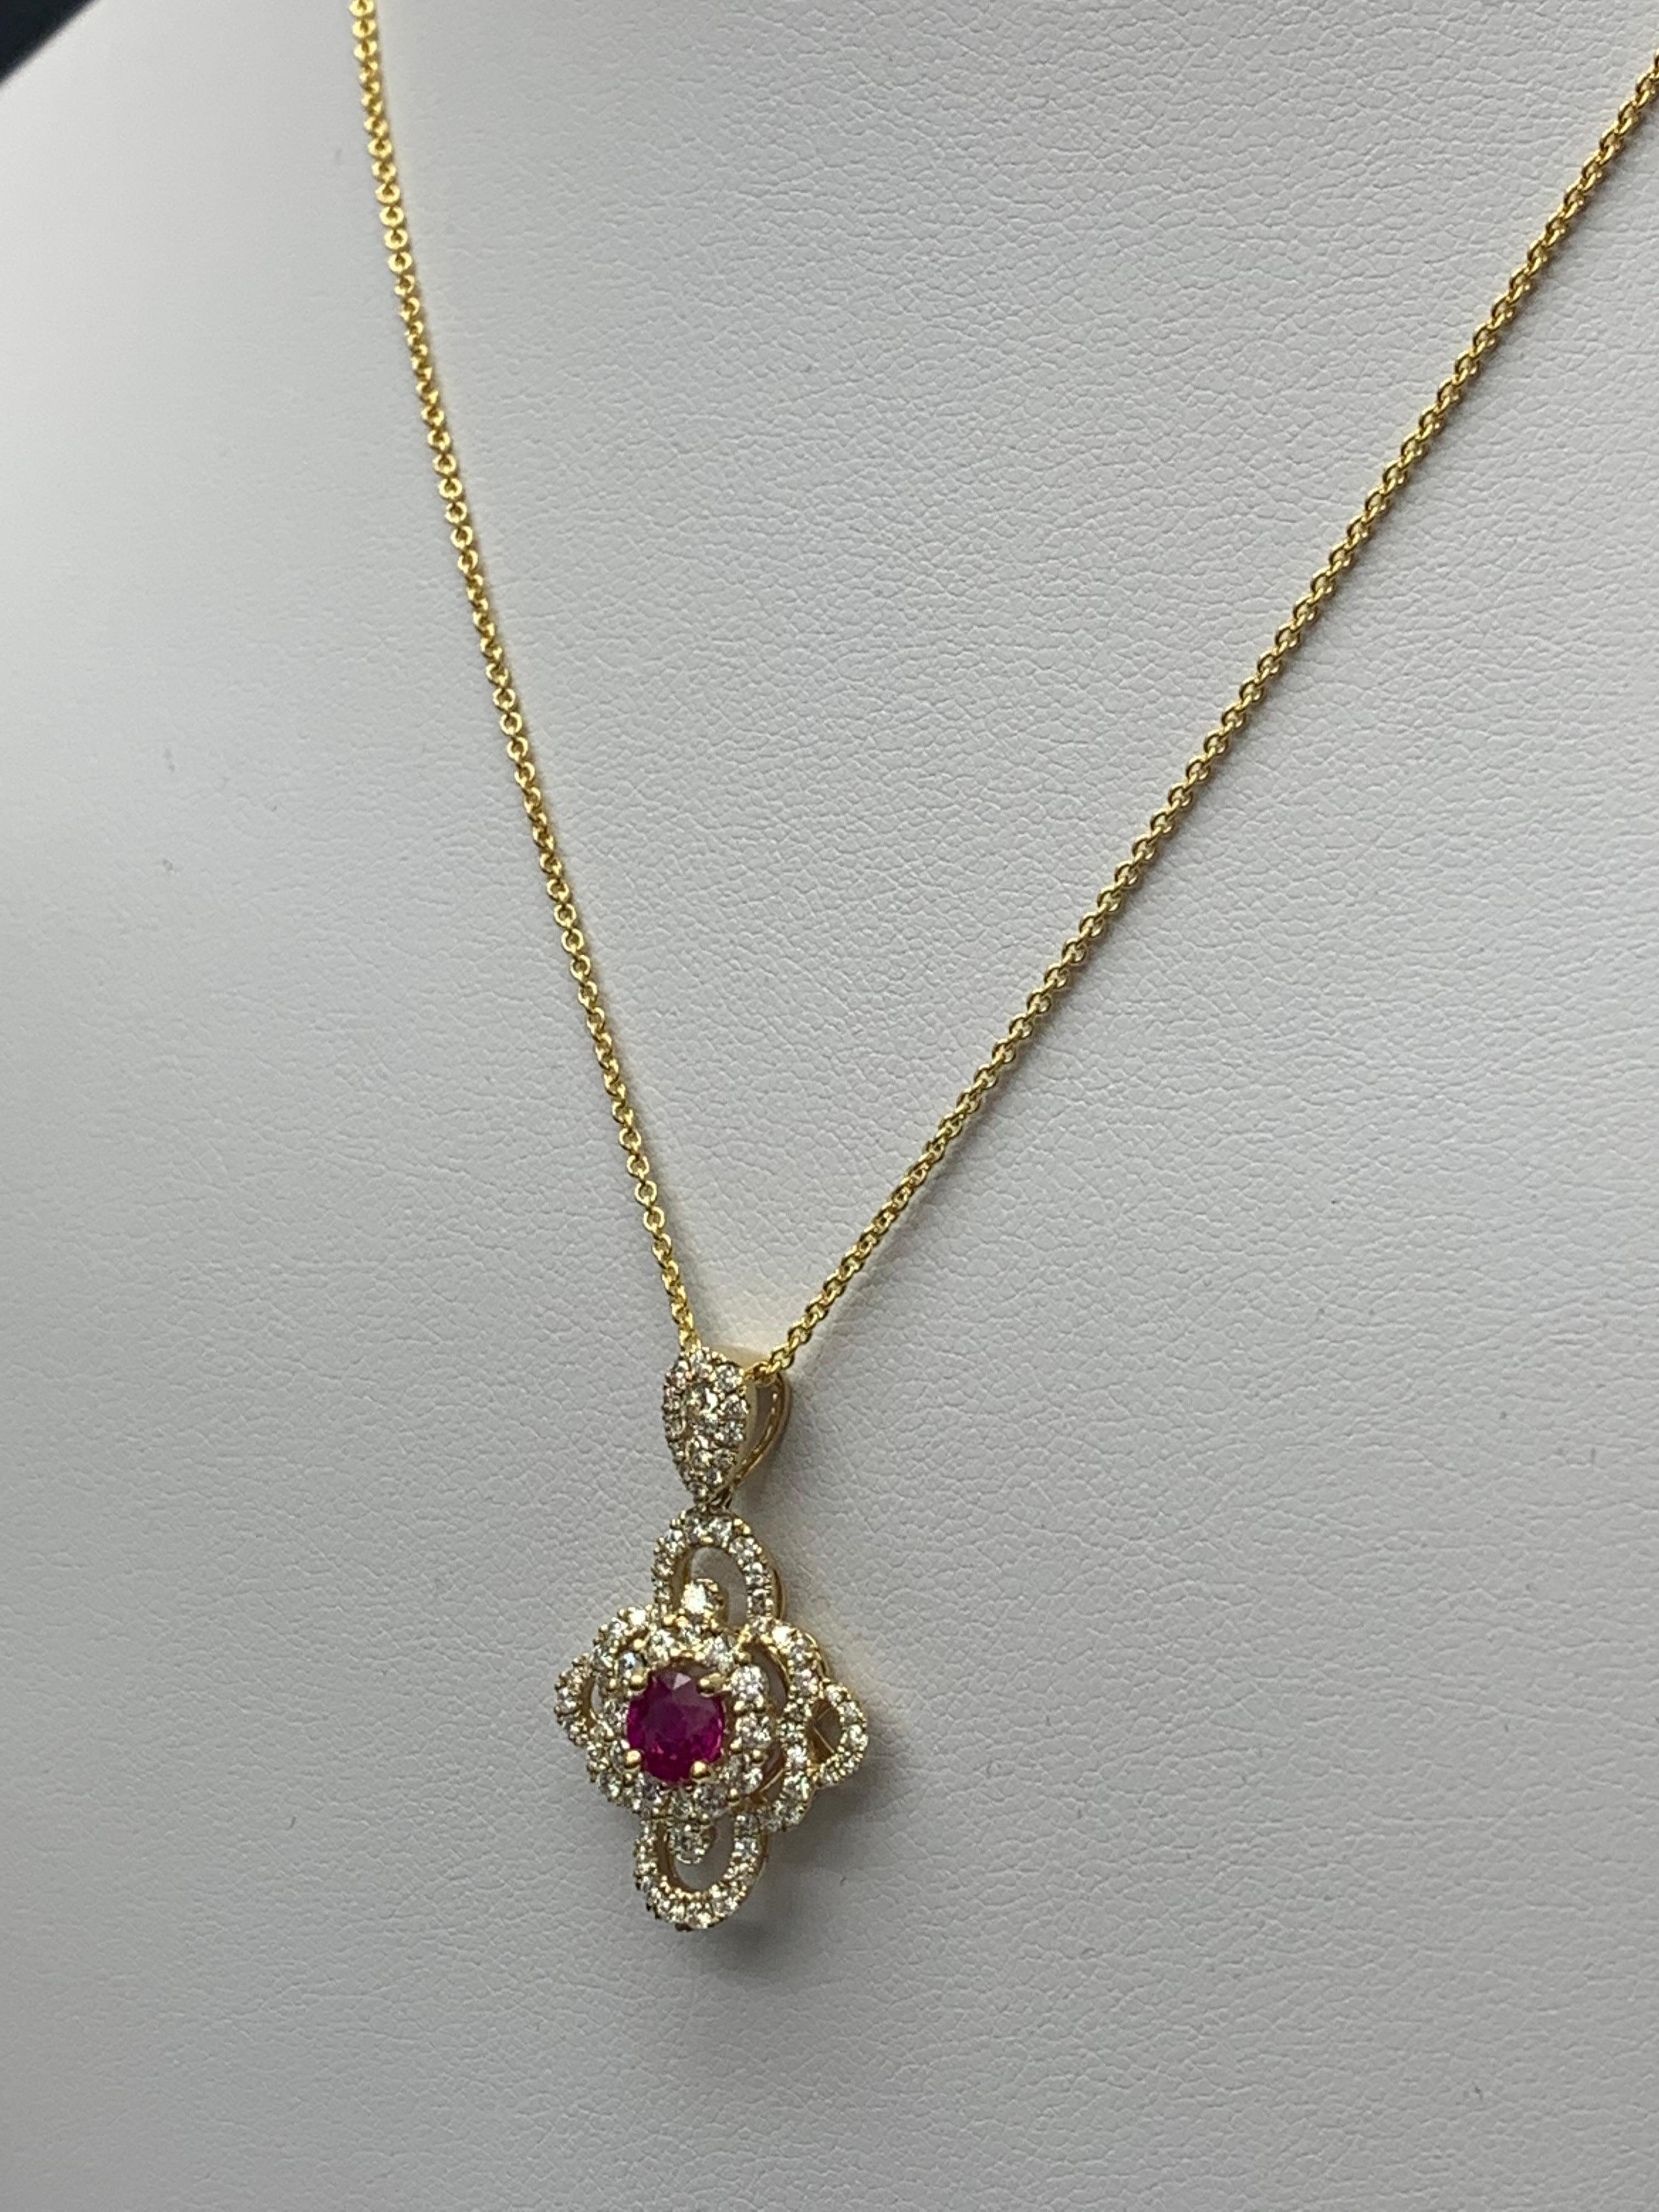 0.67 Carat Round Cut Ruby and Diamond Pendant Necklace in 18K Yellow Gold For Sale 3